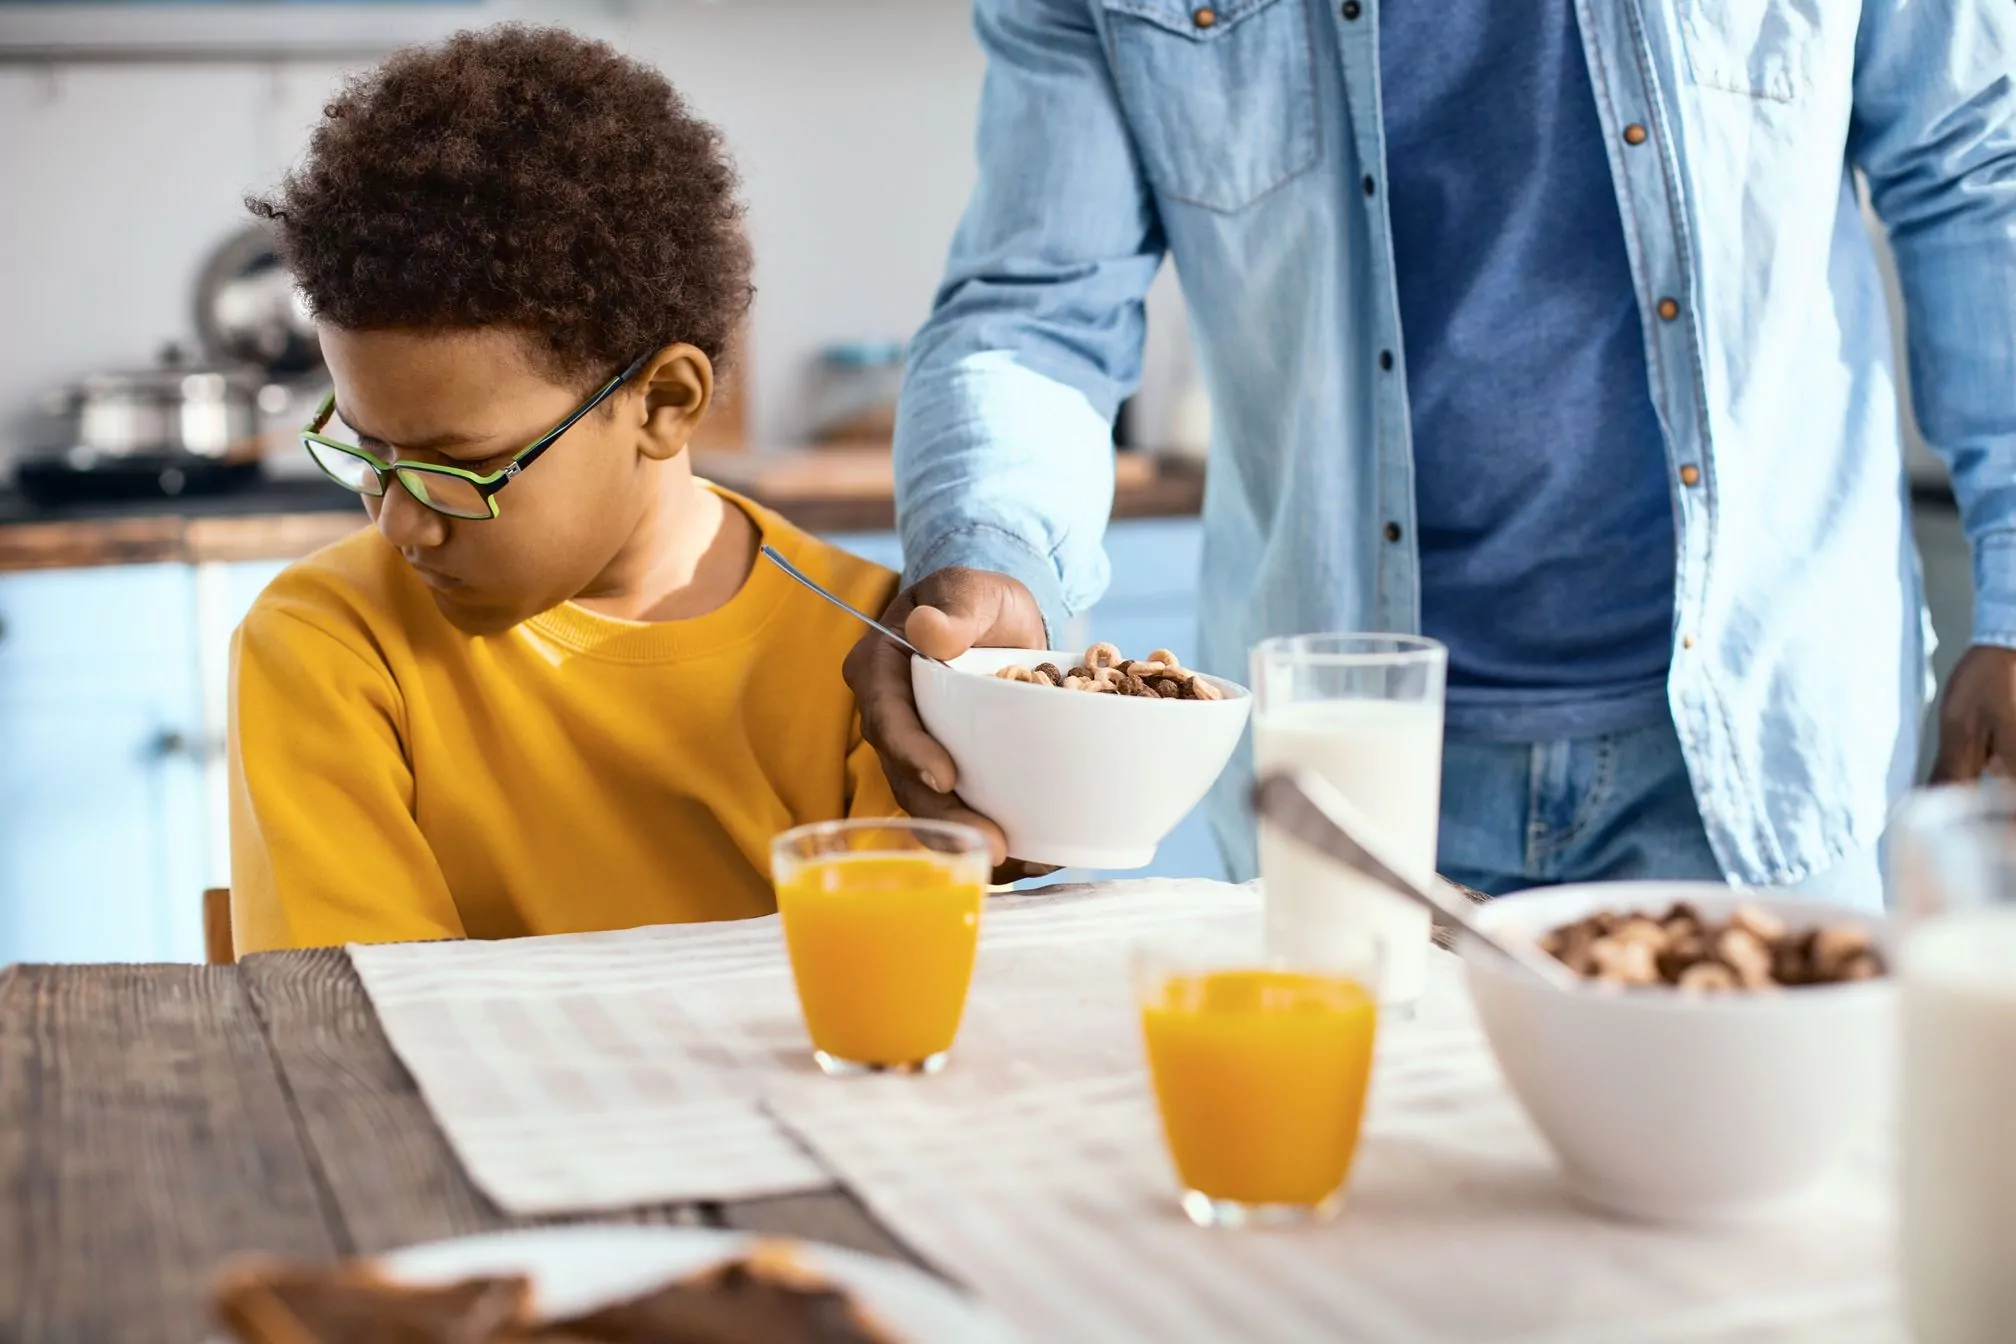 Therapy for ARFID in Children in California [Image description: a boy eating breakfast of cereal and juice and looking unhappy] Represents a potential client receiving counseling for ARFID in California